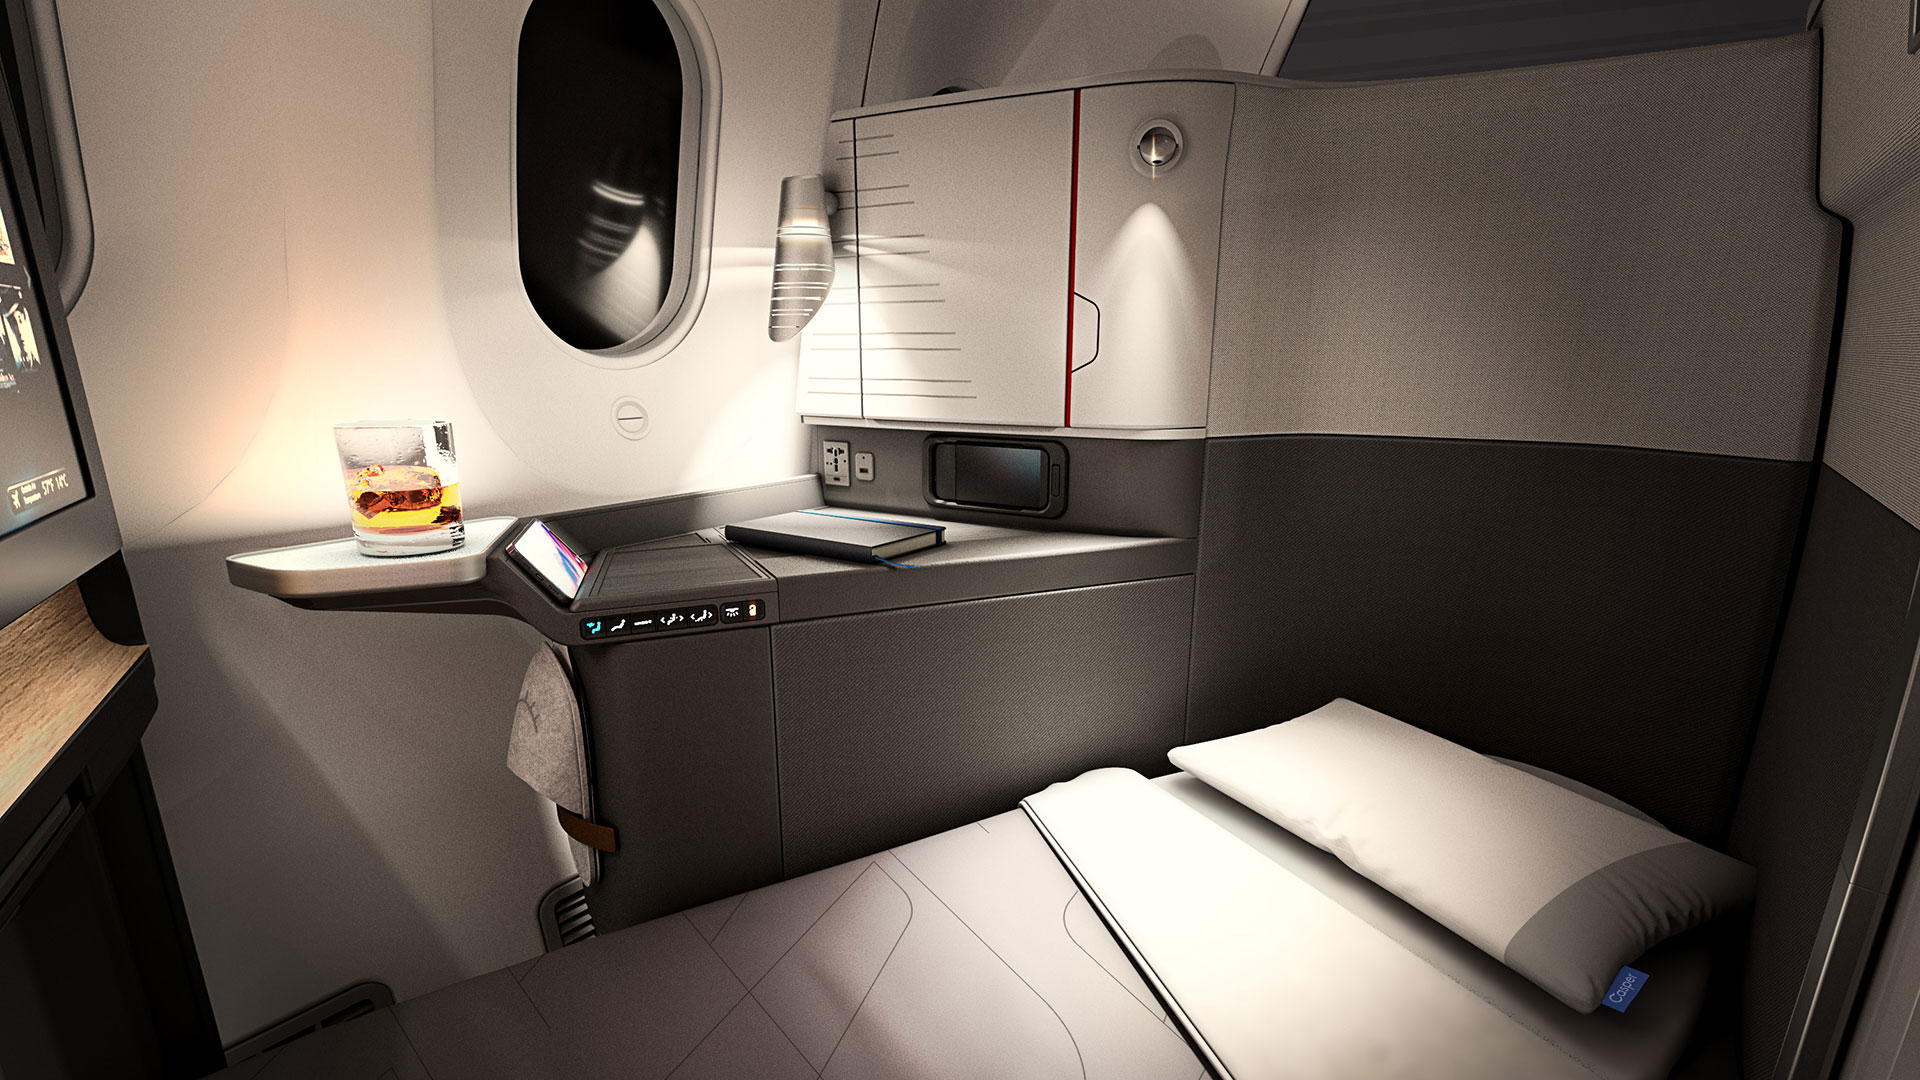 The boeing 787-9 flagship suite offers greater comfort with reclined seats and can also be folded into a comfortable position